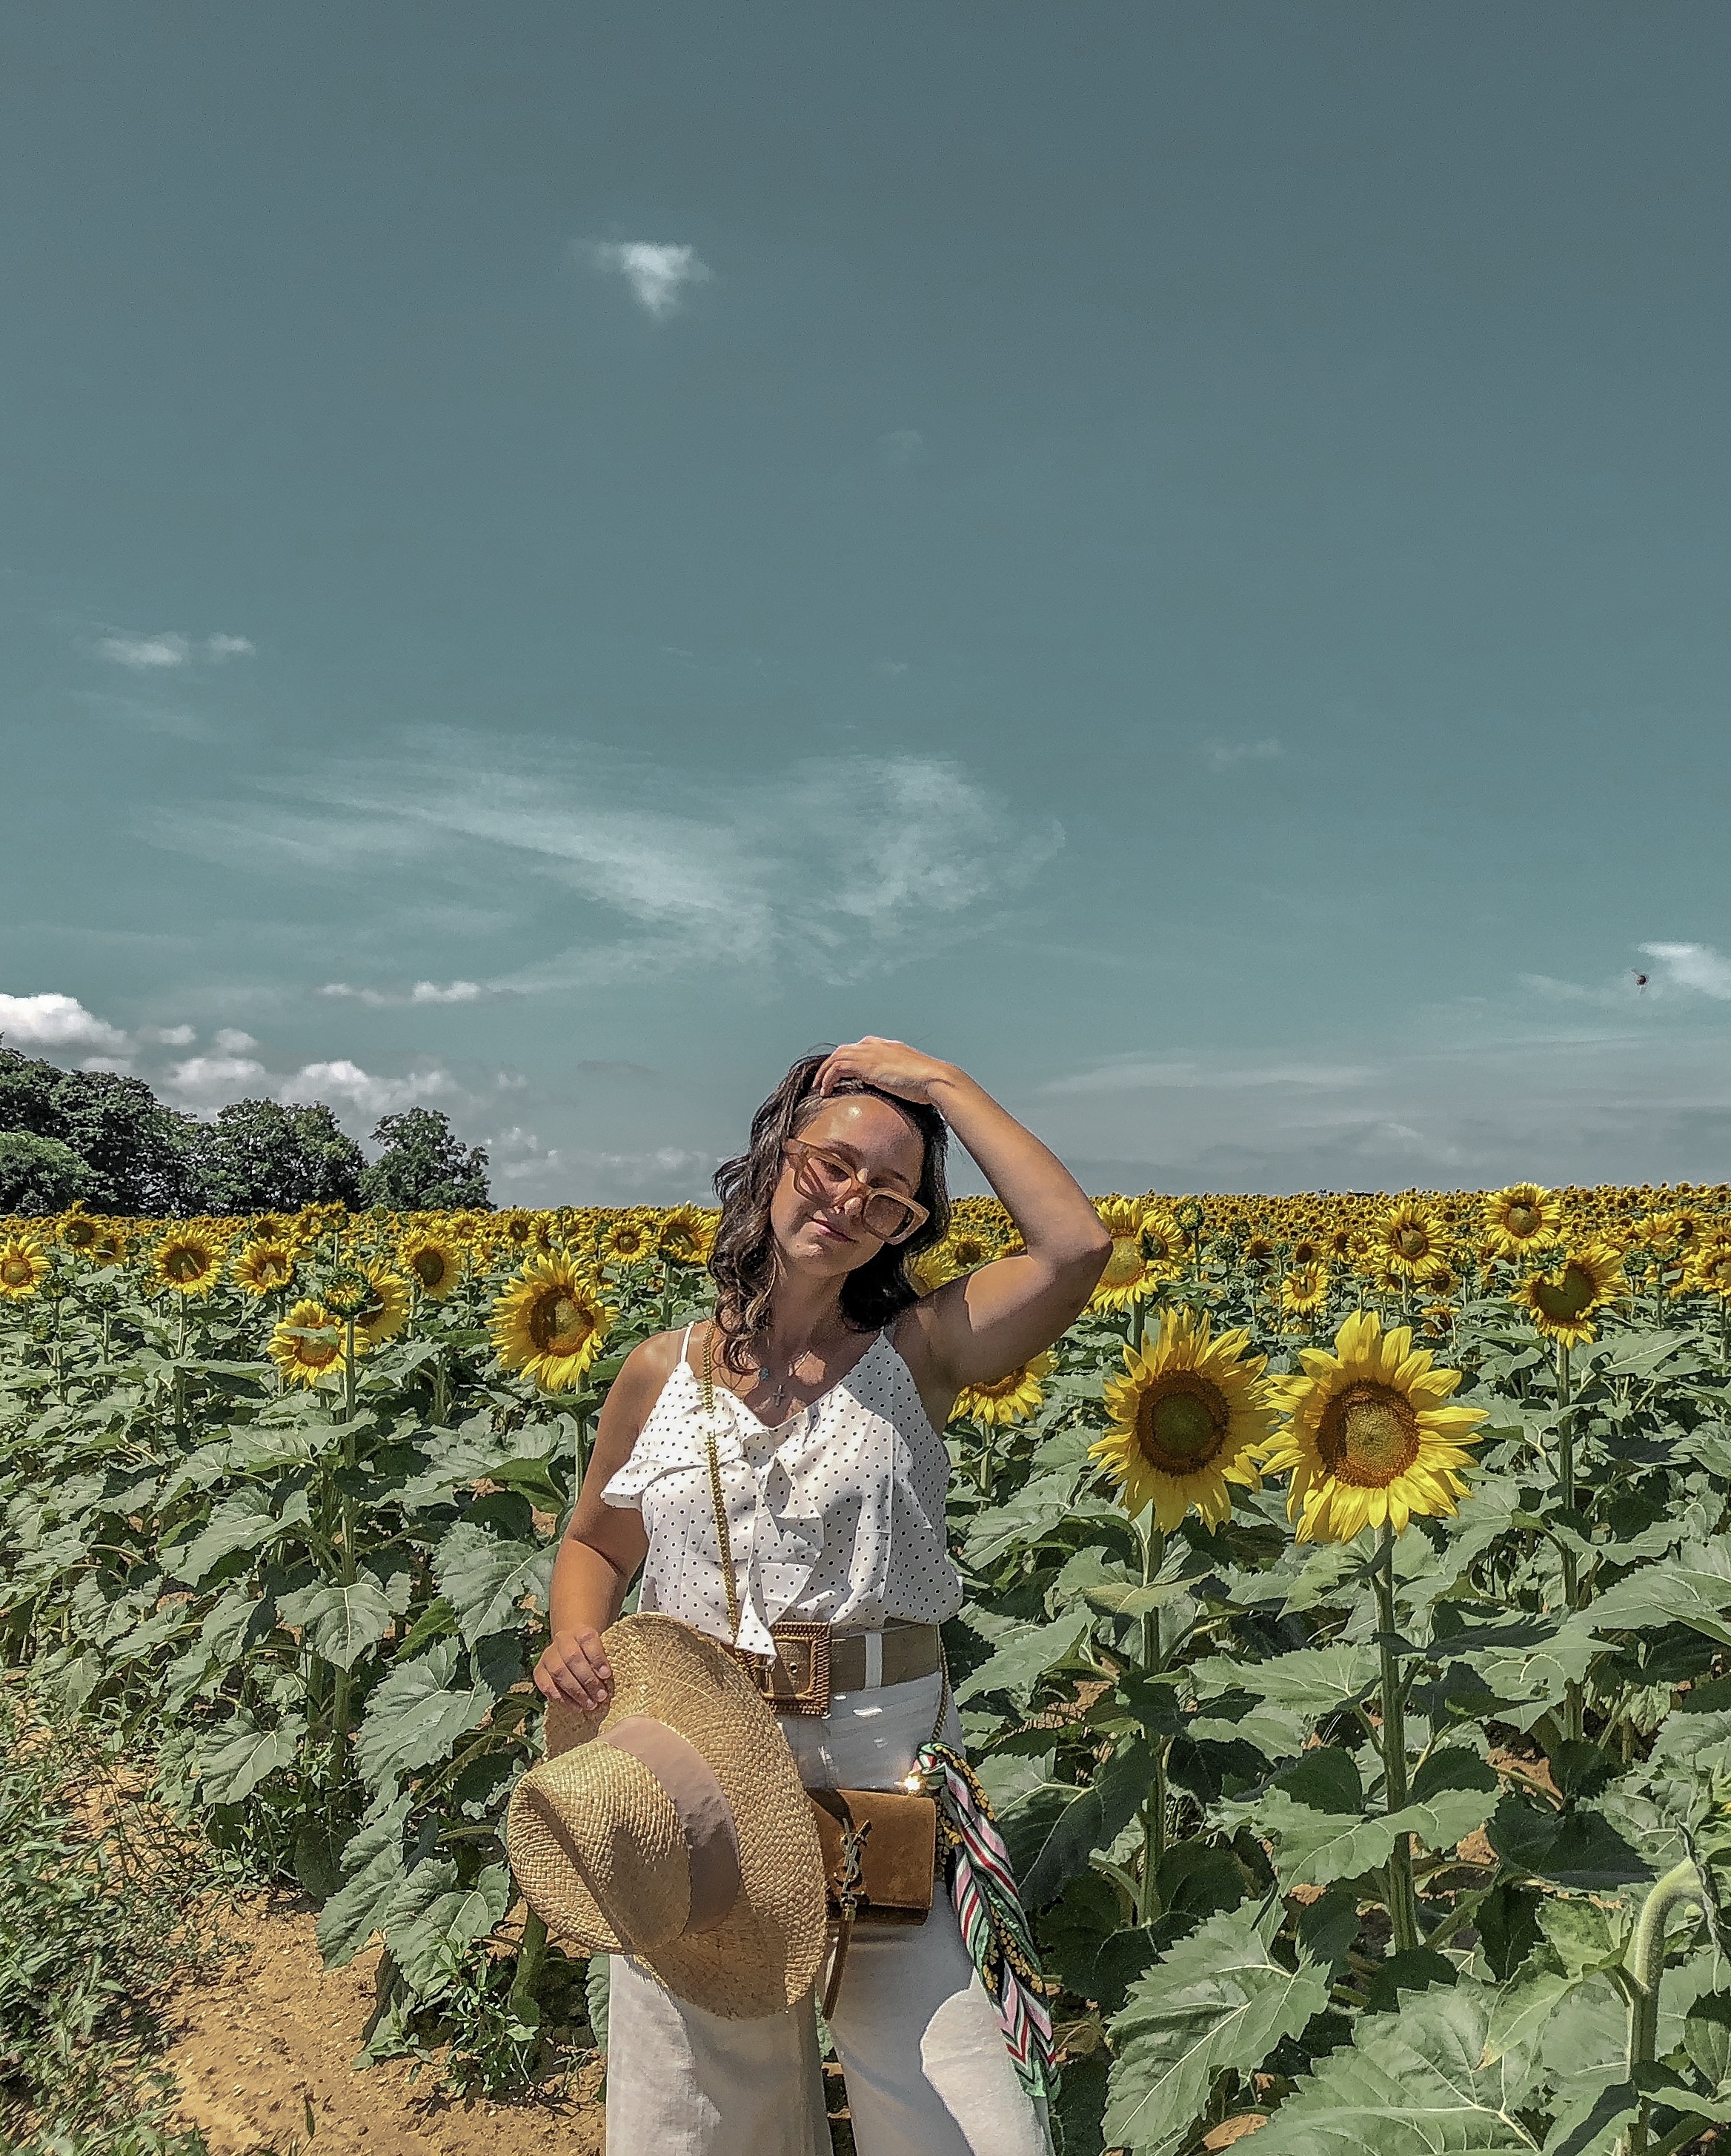 FOUR A - Top 10 Things To Do On The North Fork This Summer #northfork #nofo #blogger #summer #sunflower #longisland #travel #vacation #summer #bloggerstyle #summerstyle #outfit #summeroutfit